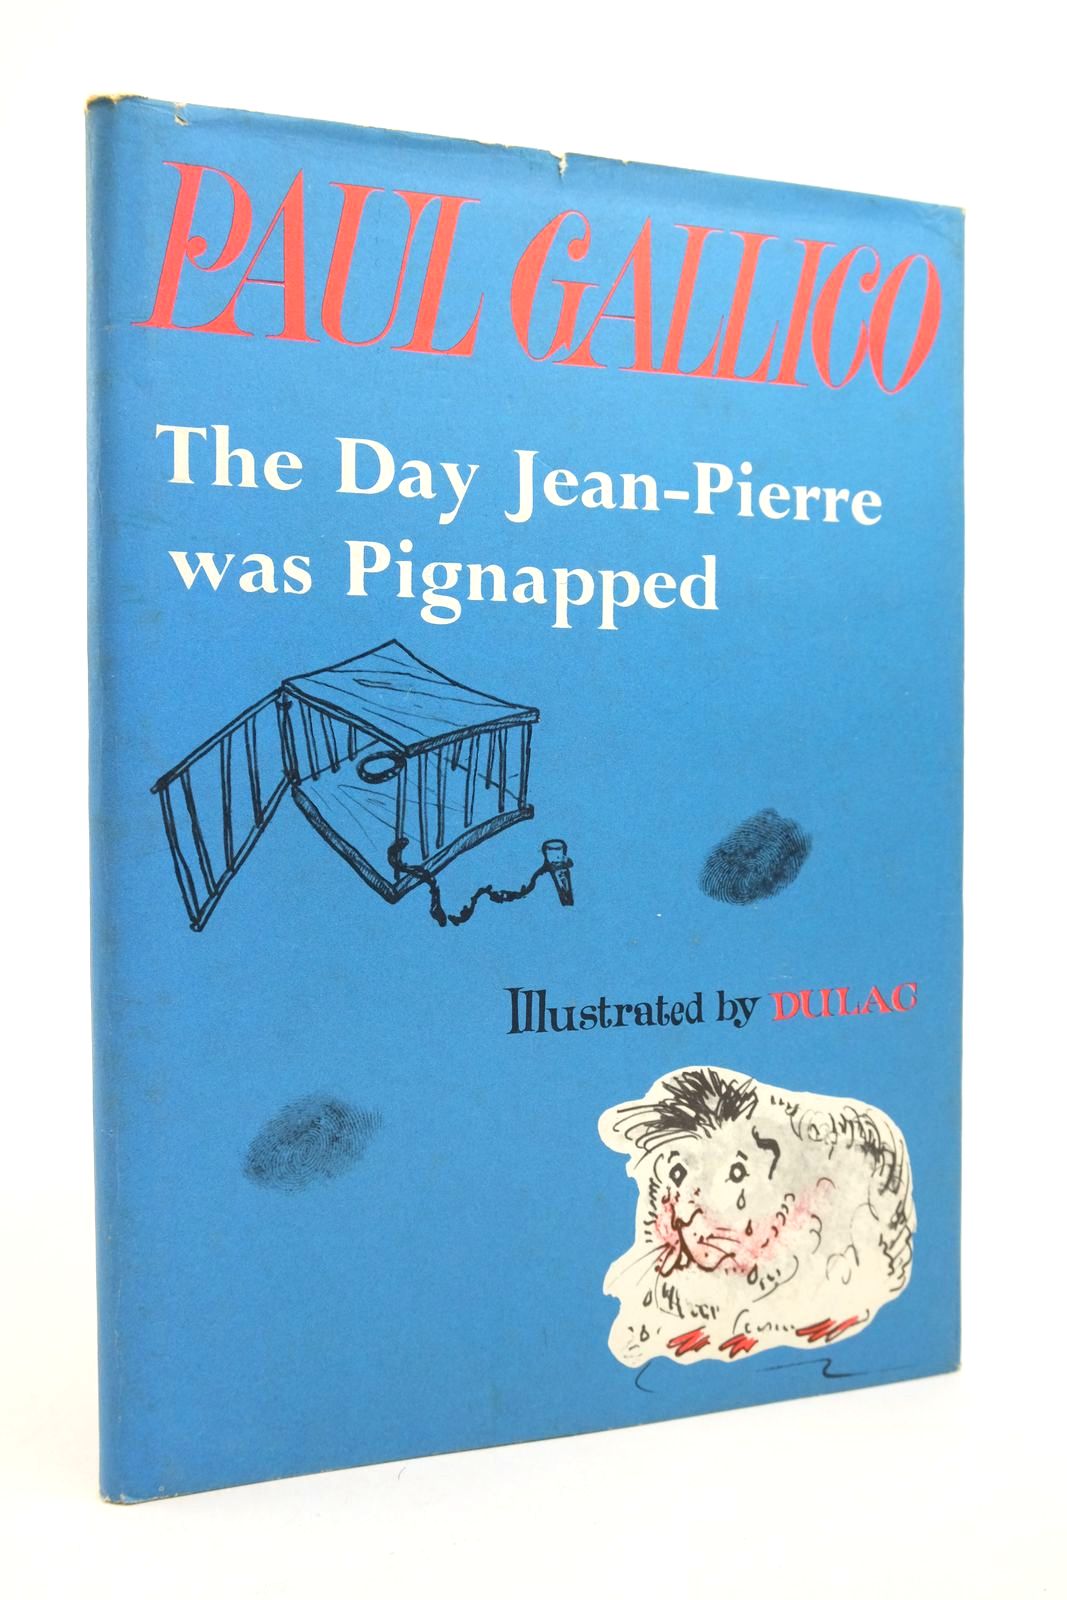 Photo of THE DAY JEAN-PIERRE WAS PIGNAPPED written by Gallico, Paul illustrated by Dulac,  published by Heinemann (STOCK CODE: 2140207)  for sale by Stella & Rose's Books